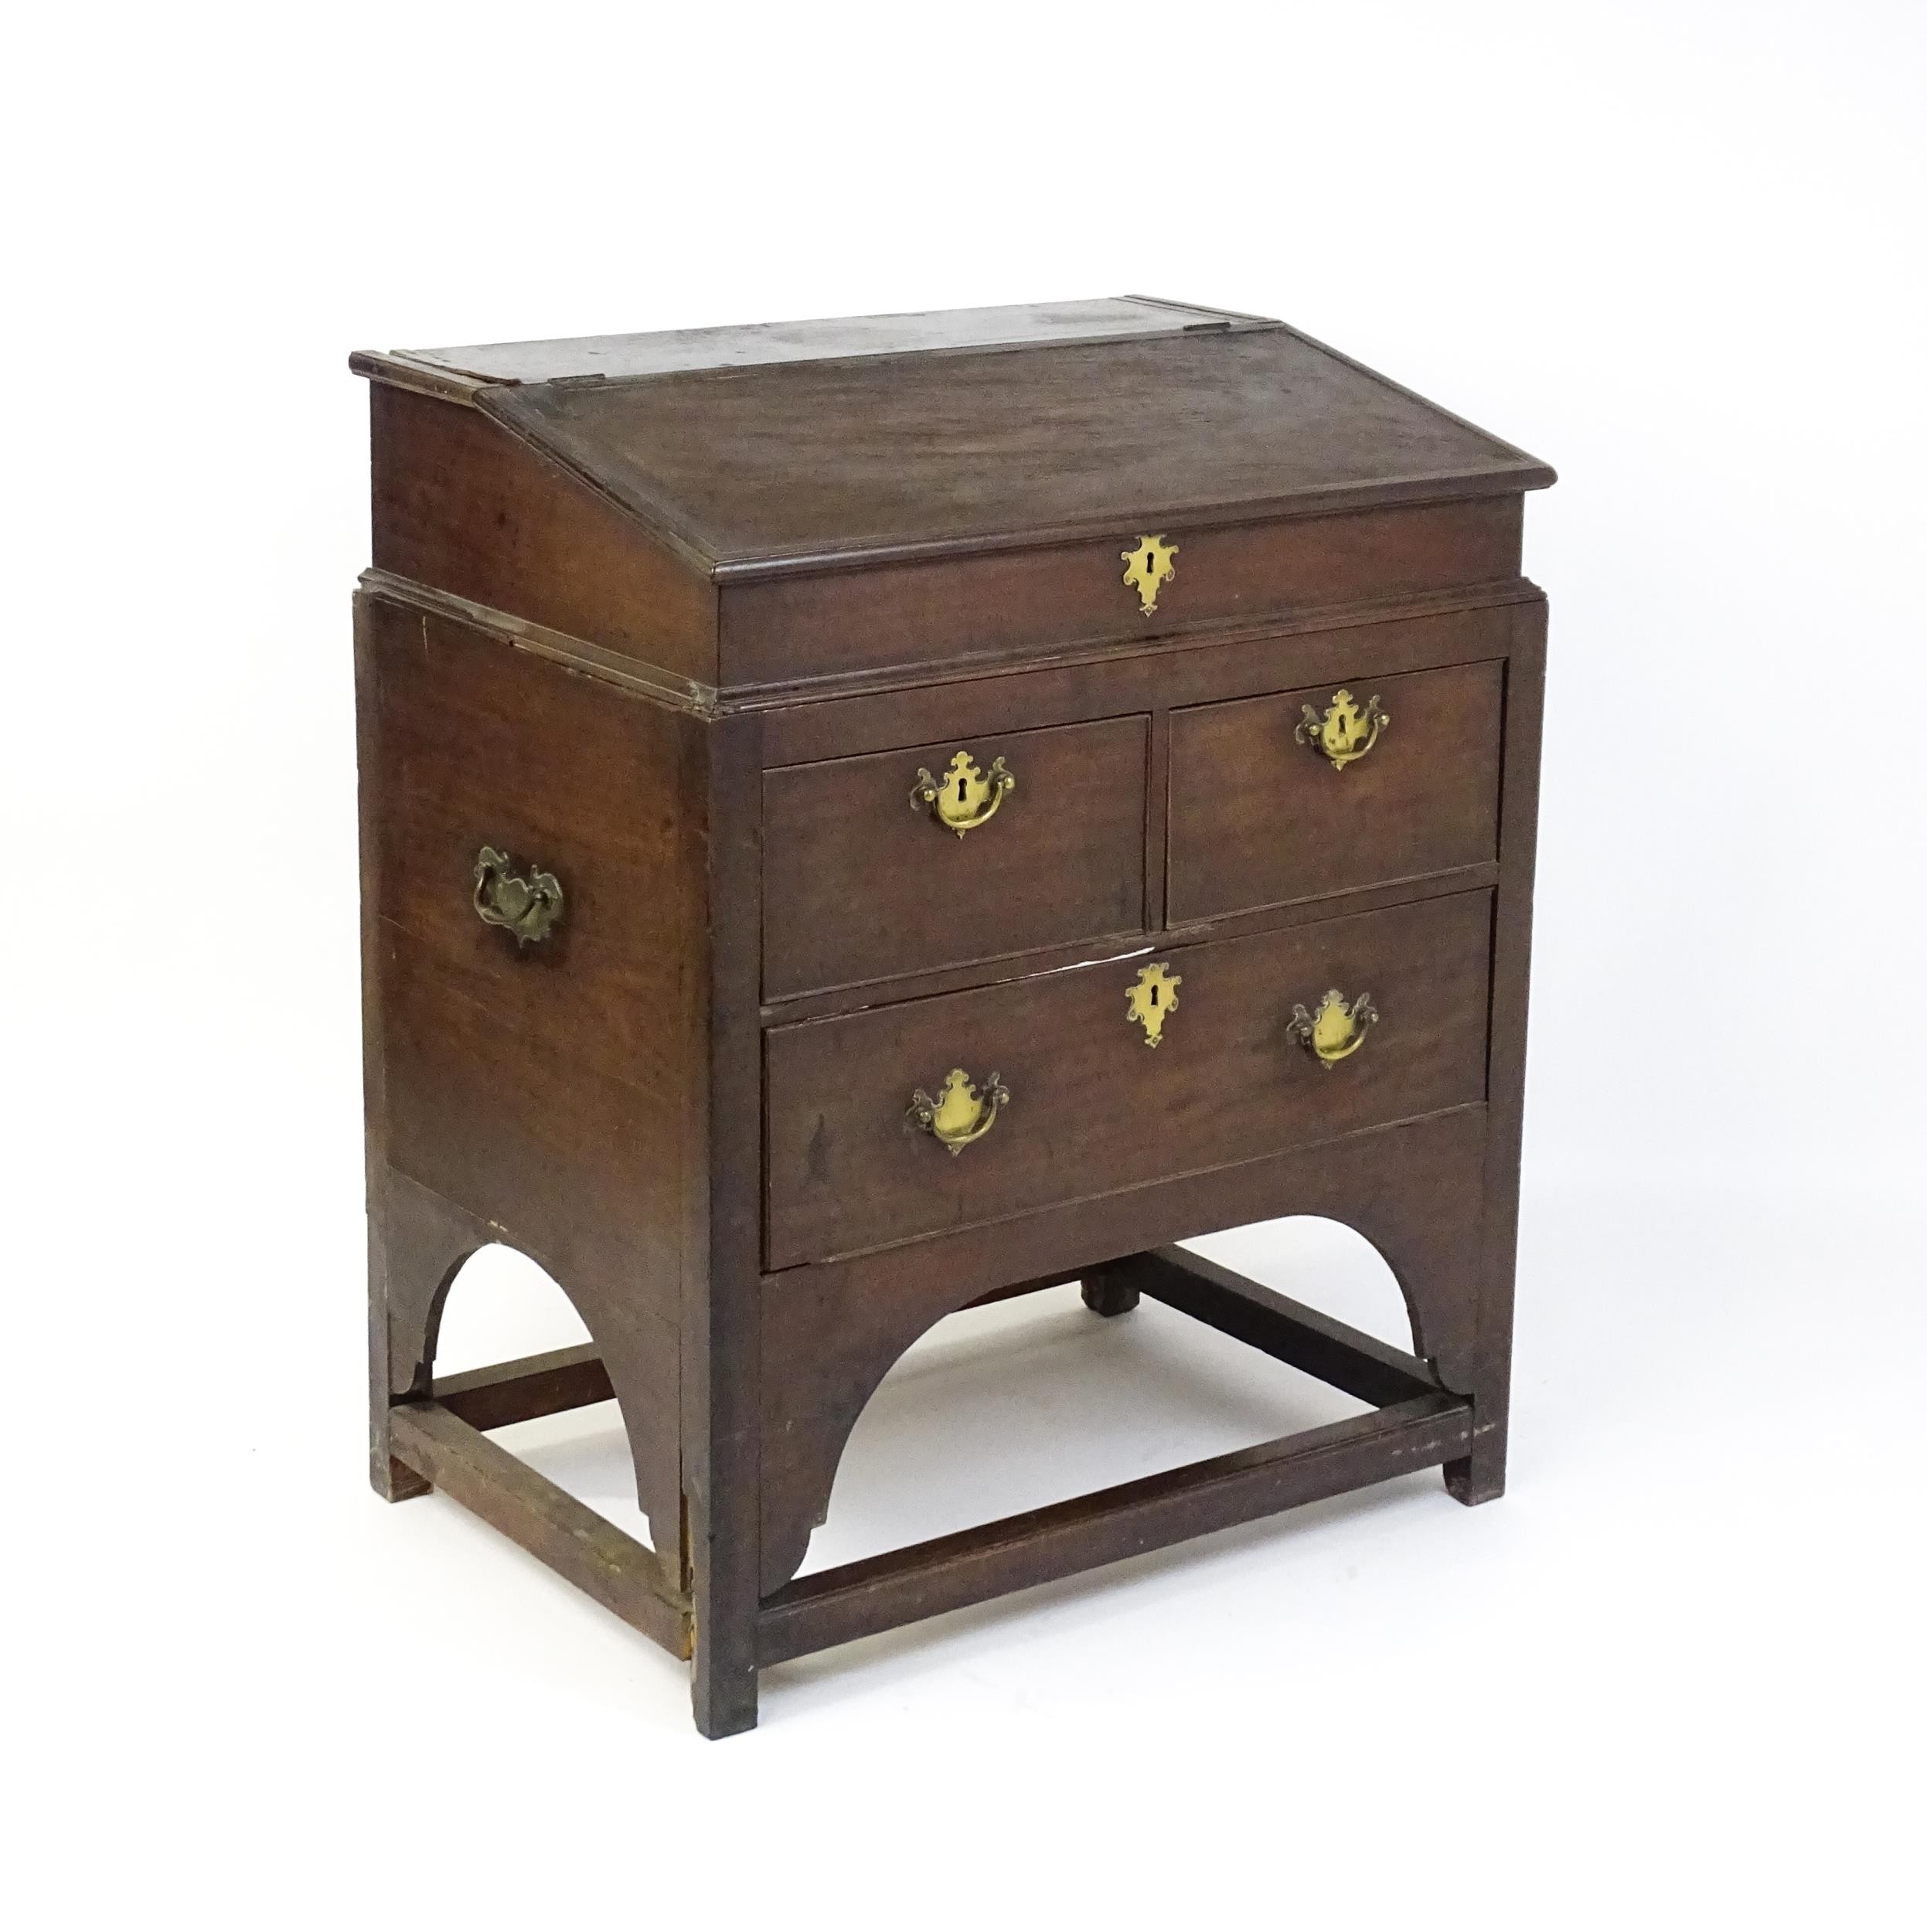 An early / mid 18thC mahogany clerks desk with a hinged sloping lid opening to show a fitted